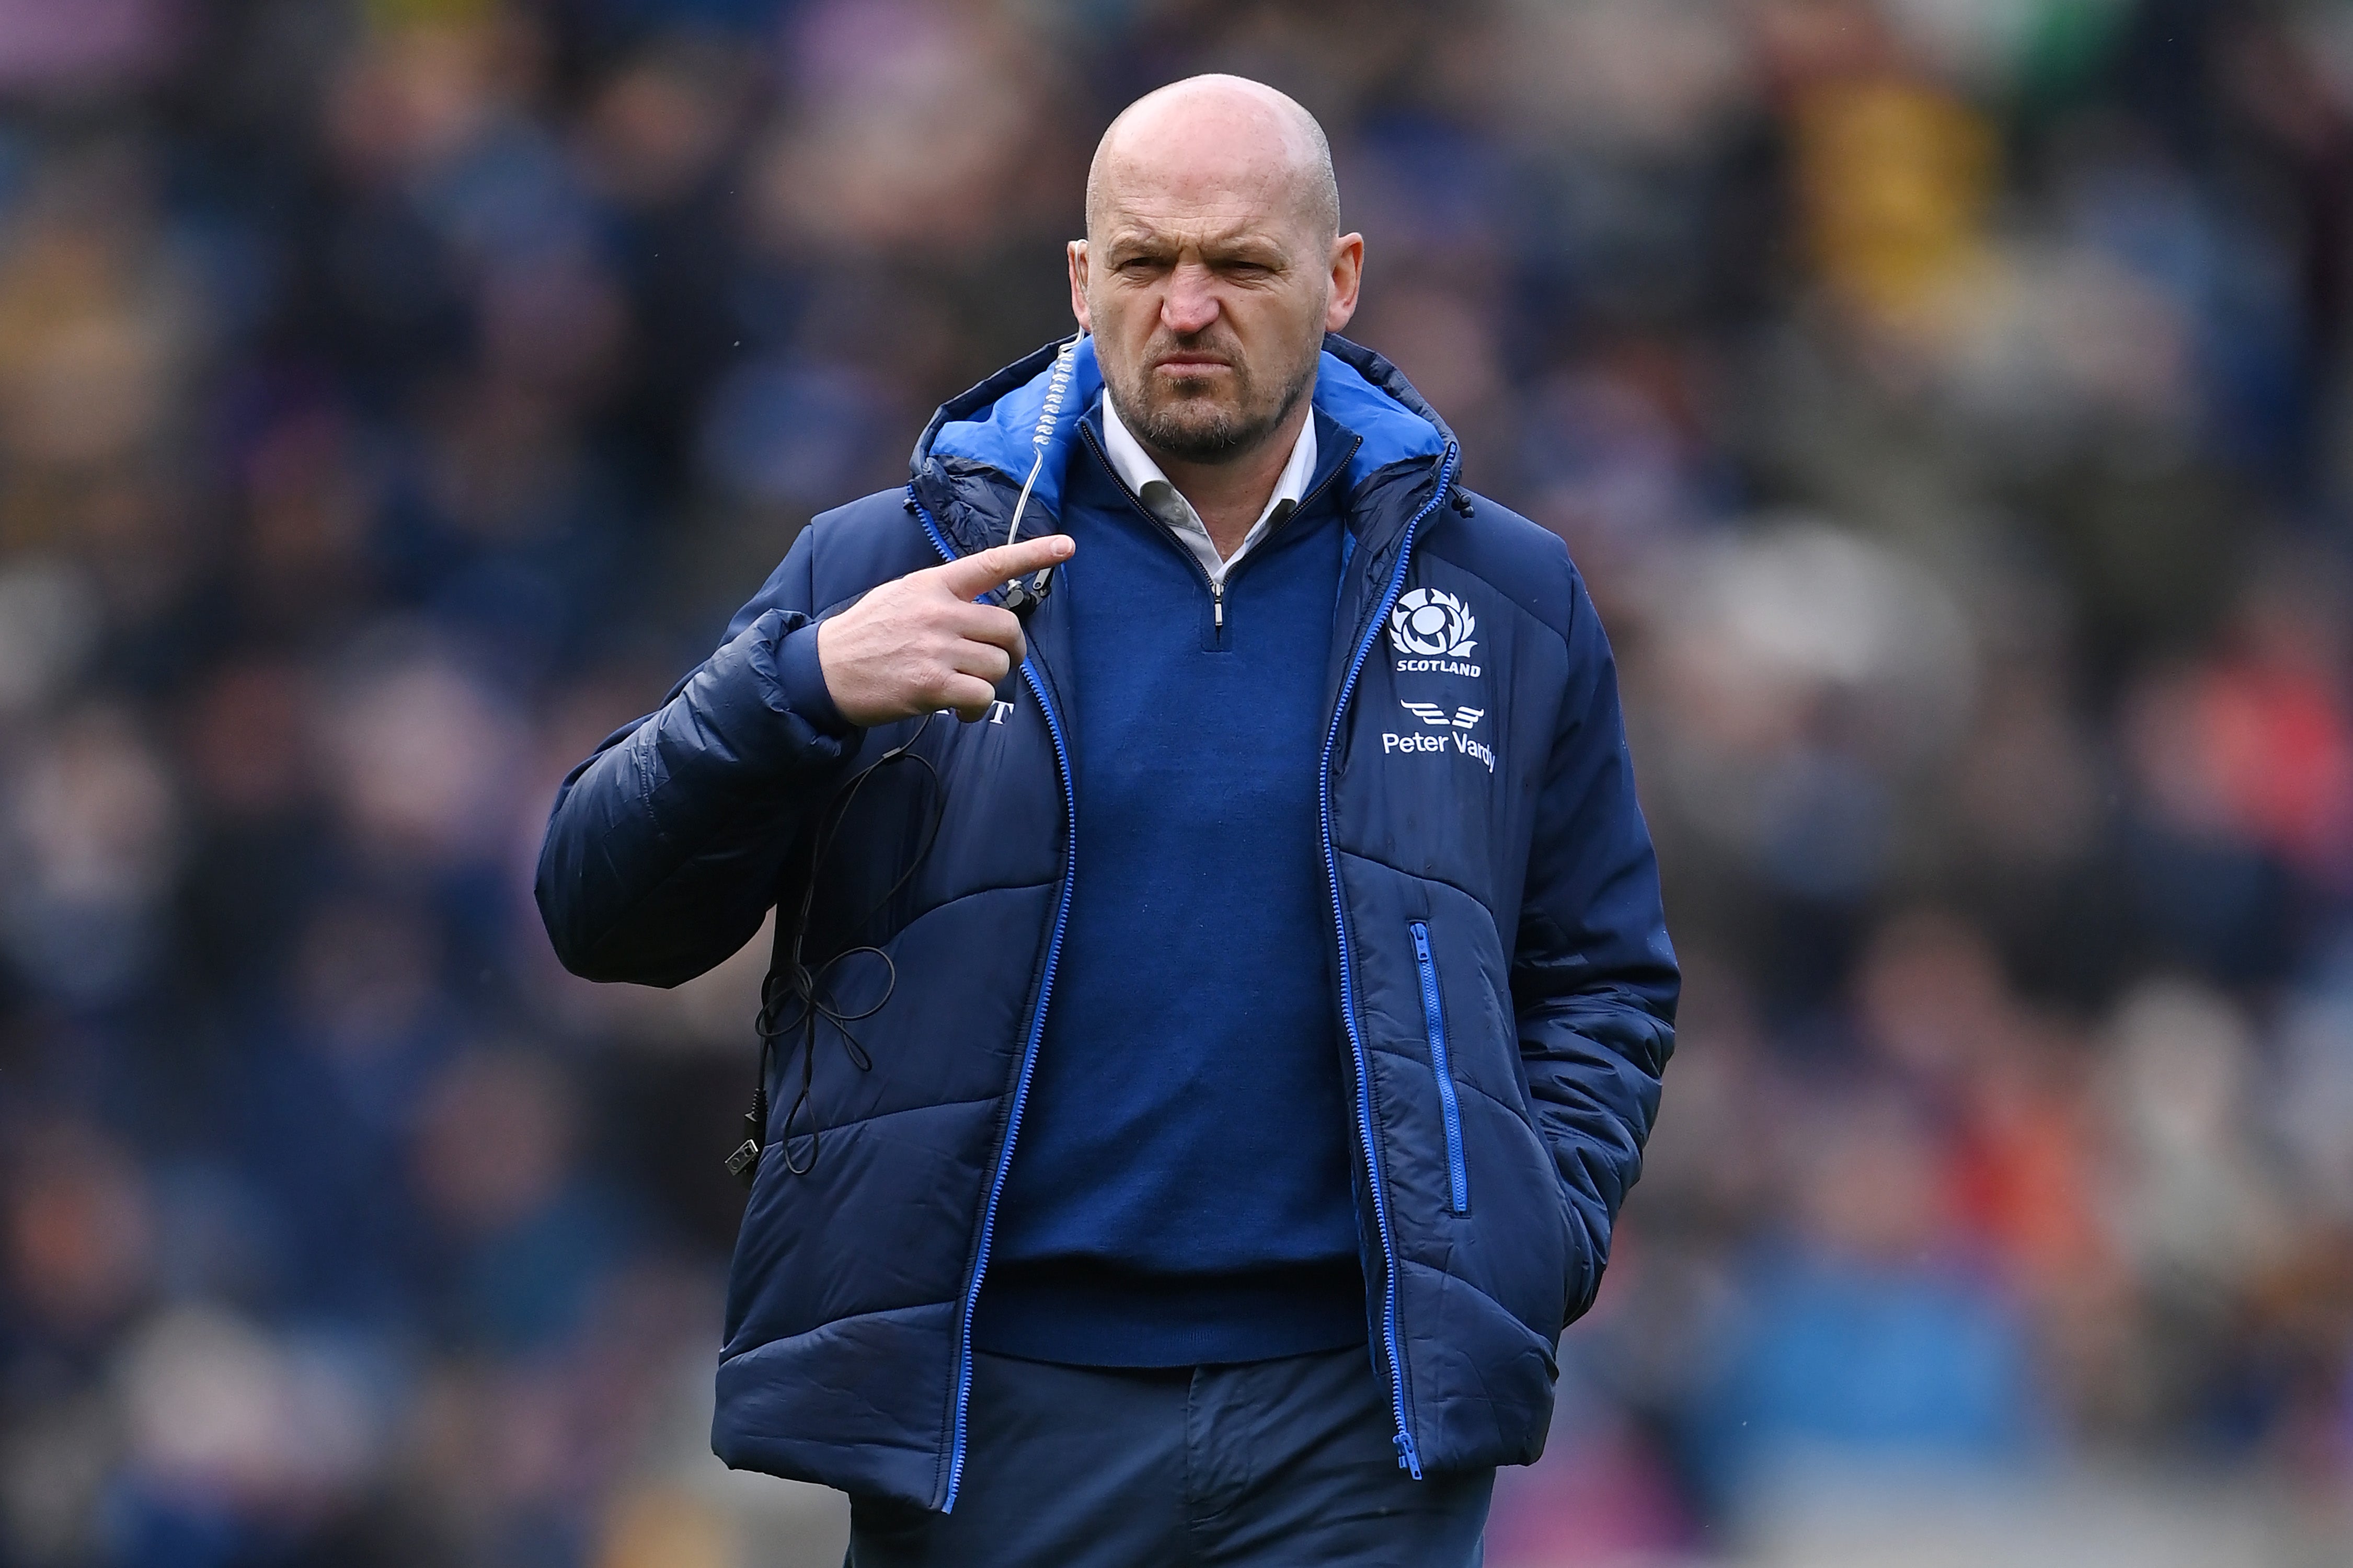 Gregor Townsend handed caps to Stafford McDowall and Cameron Henderson ahead of the test against Italy